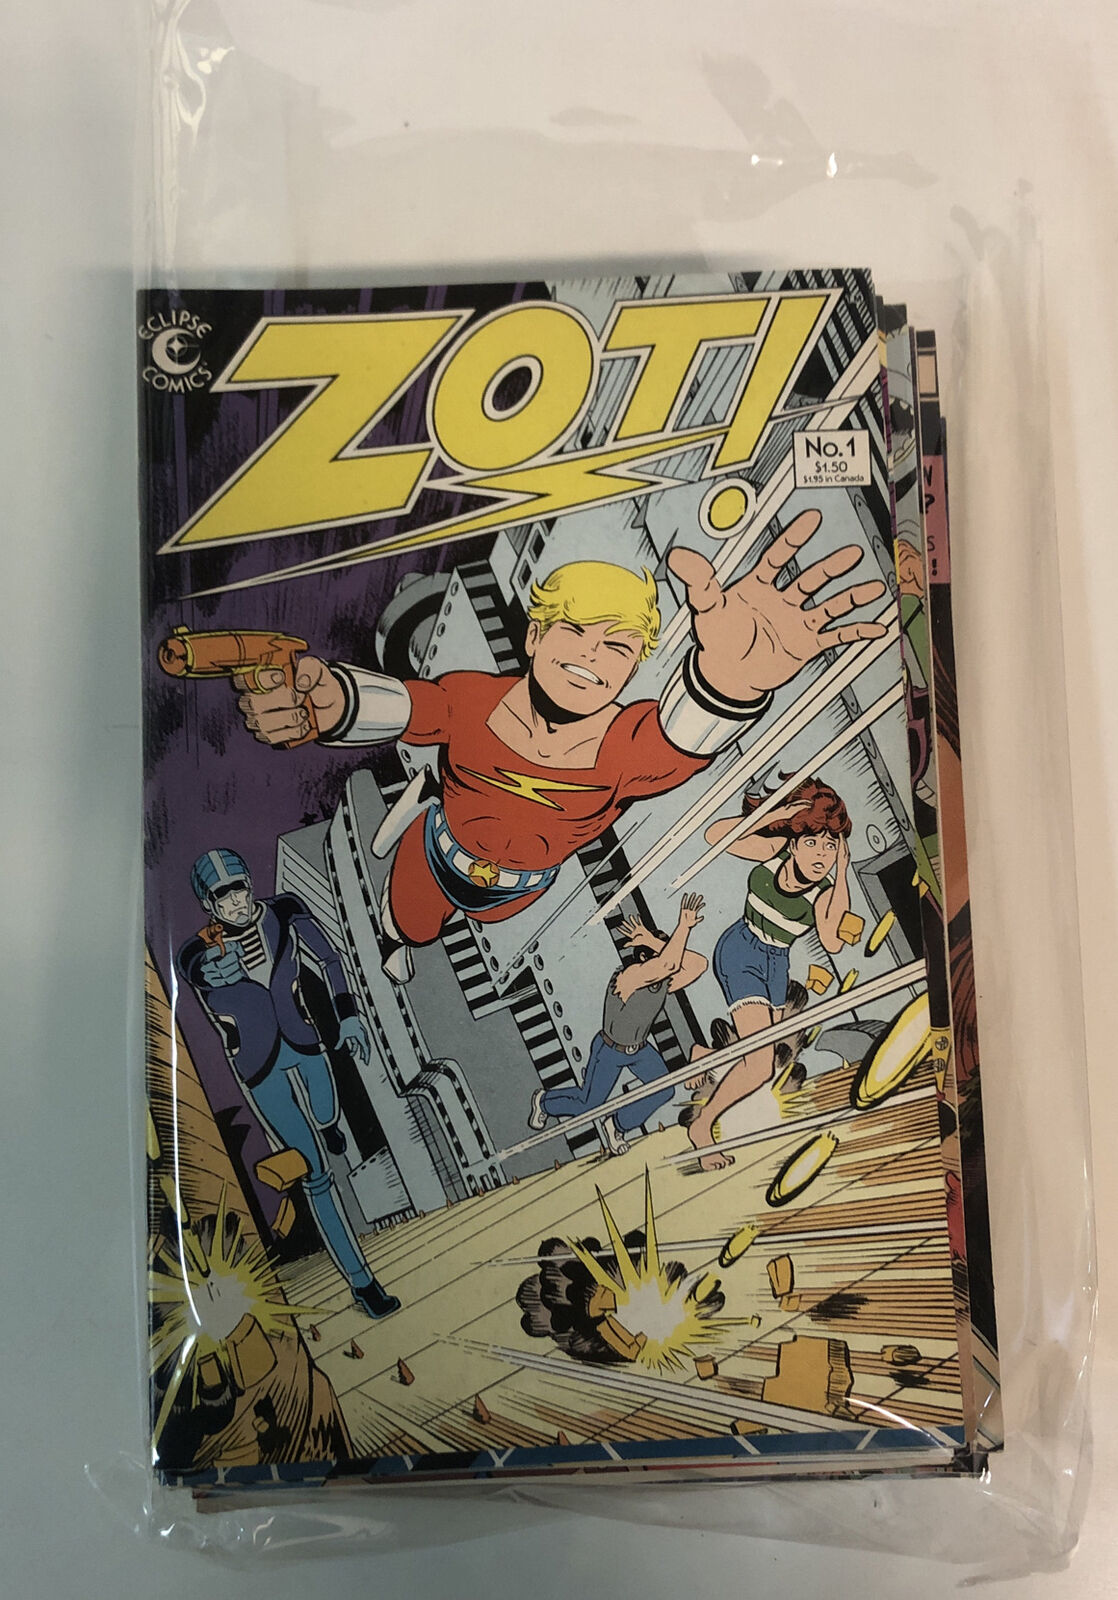 Zot (1987) #1-36 (VF/NM) Complete Set By Eclipse Comics